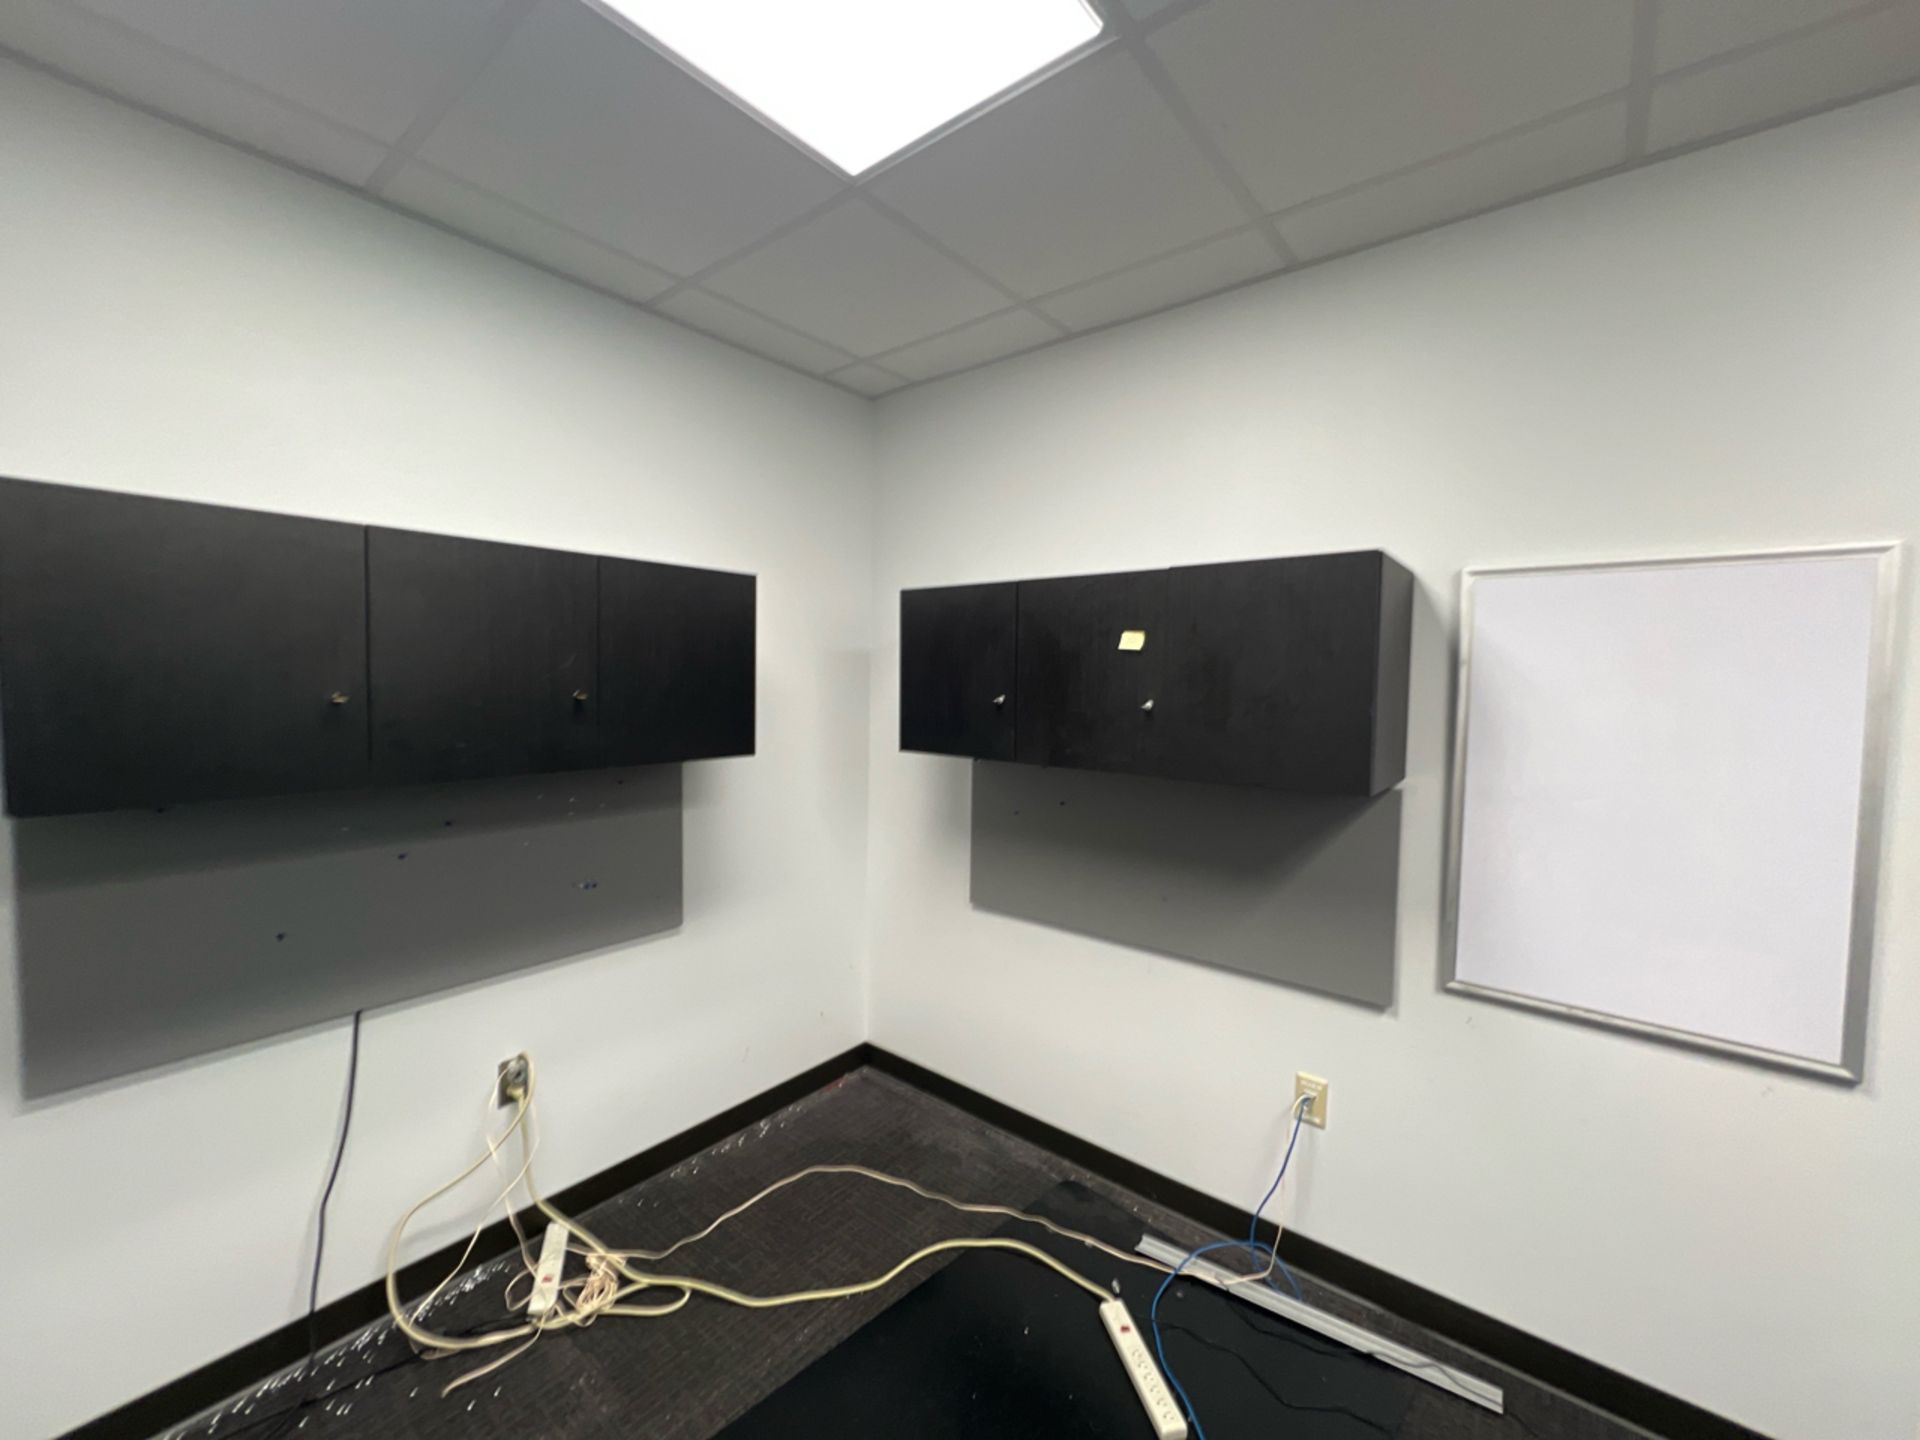 OFFICE TO INCLUDE: DESK WITH OVERHEAD STORAGE, OVERHEAD STORAGE SYSTEMS, FILE CABINET, PHONES, - Image 2 of 5